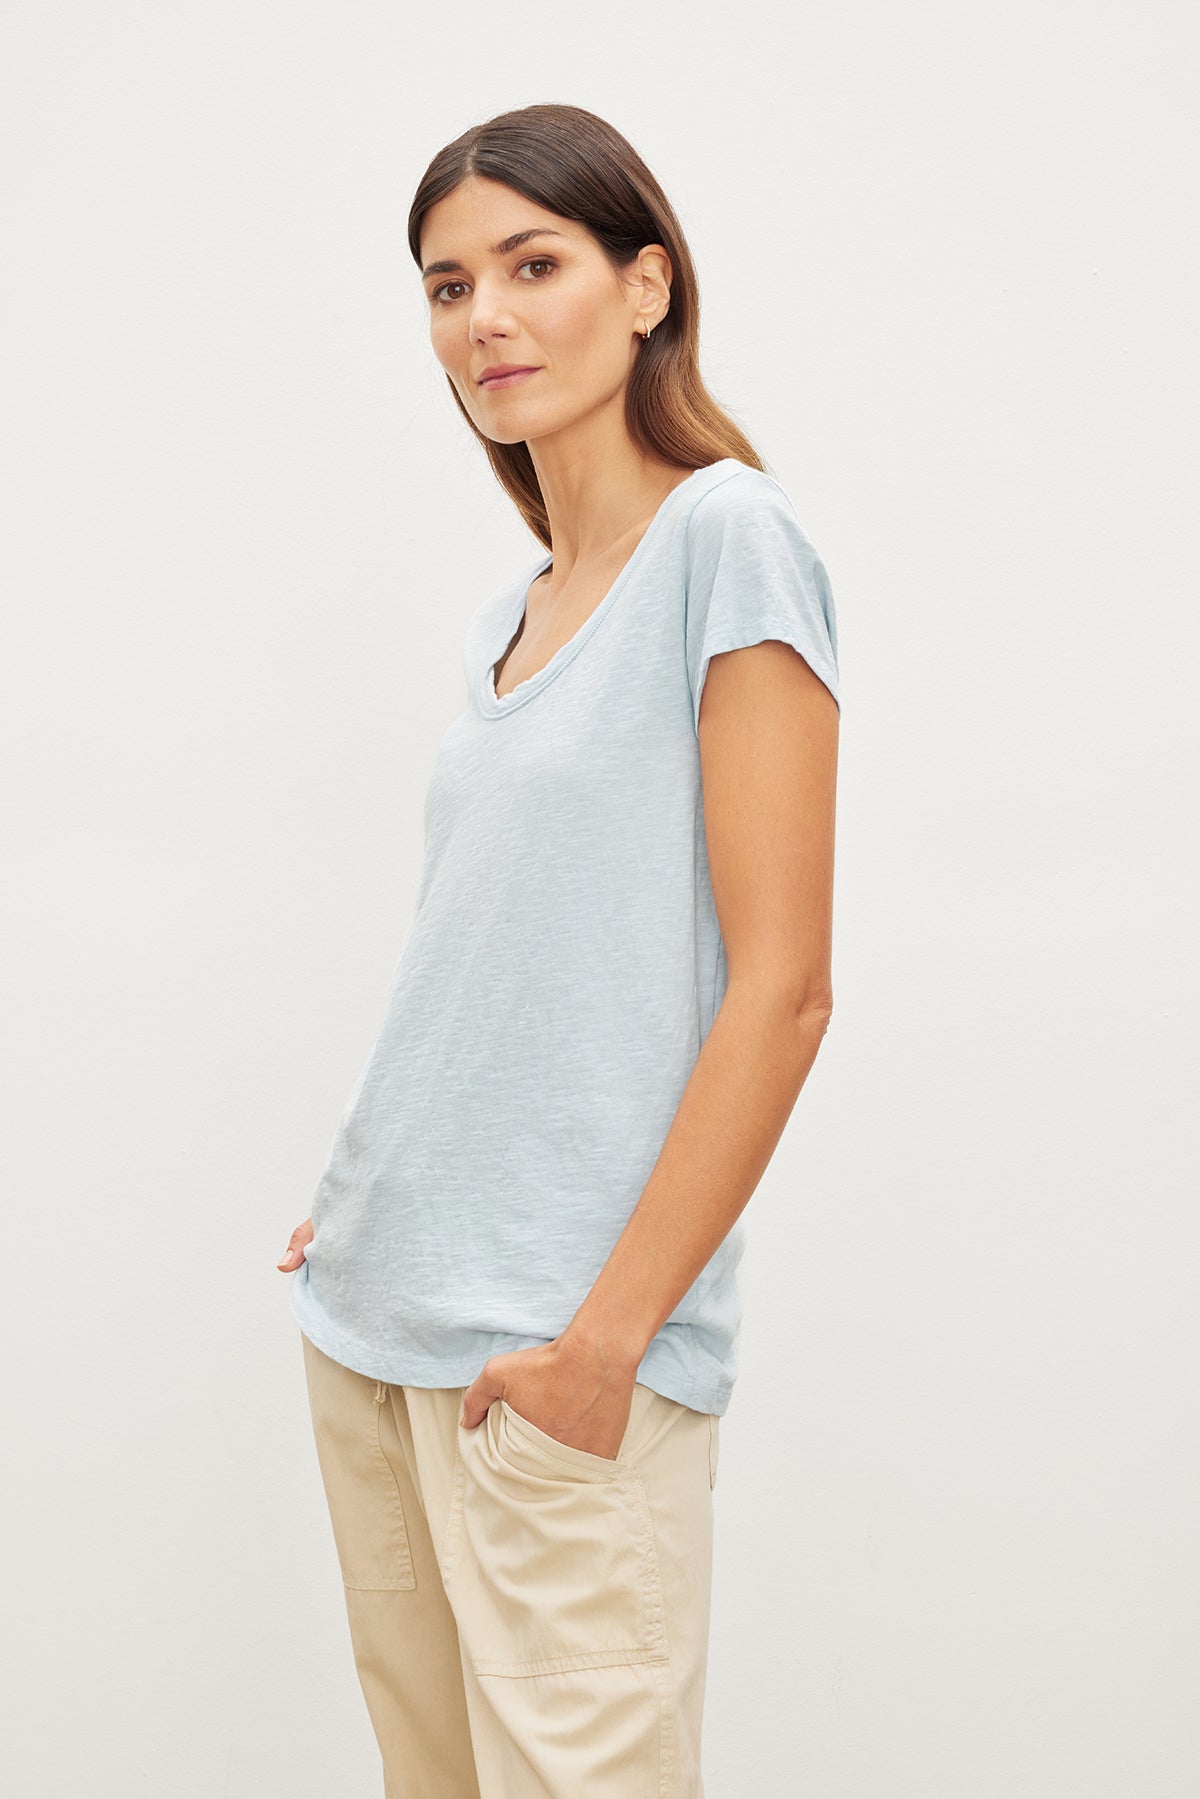 Woman in a Velvet by Graham & Spencer KIRA ORIGINAL SLUB SCOOP NECK TEE and beige pants standing against a white background, looking at the camera.-35982850425025